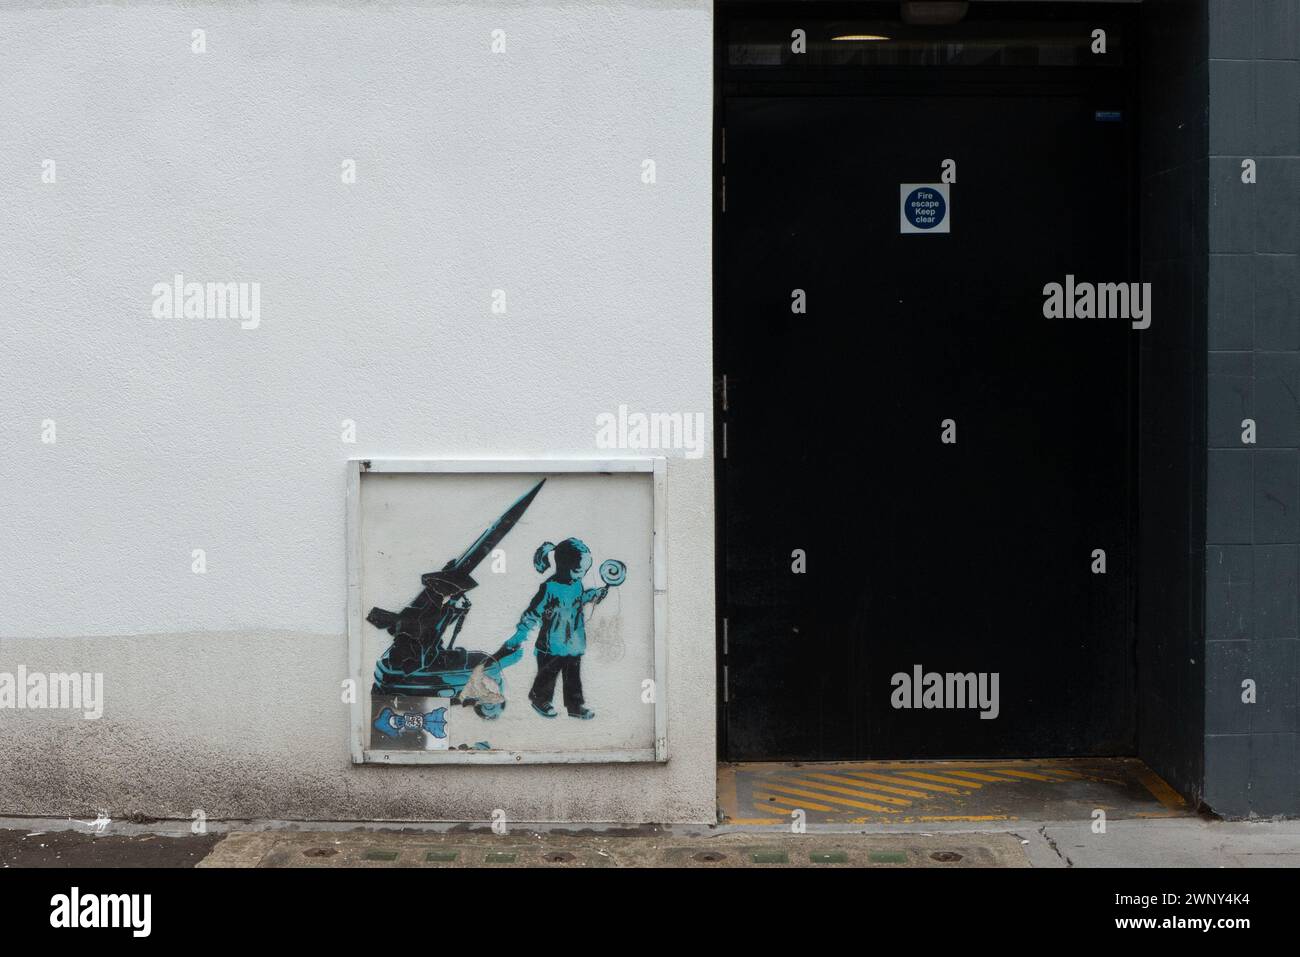 A grafitti of a girl and a rocket of world-famous street-artist Banksy on a wall in Camden Town, London. The artwork is listed in streetmaps and apps. Stock Photo